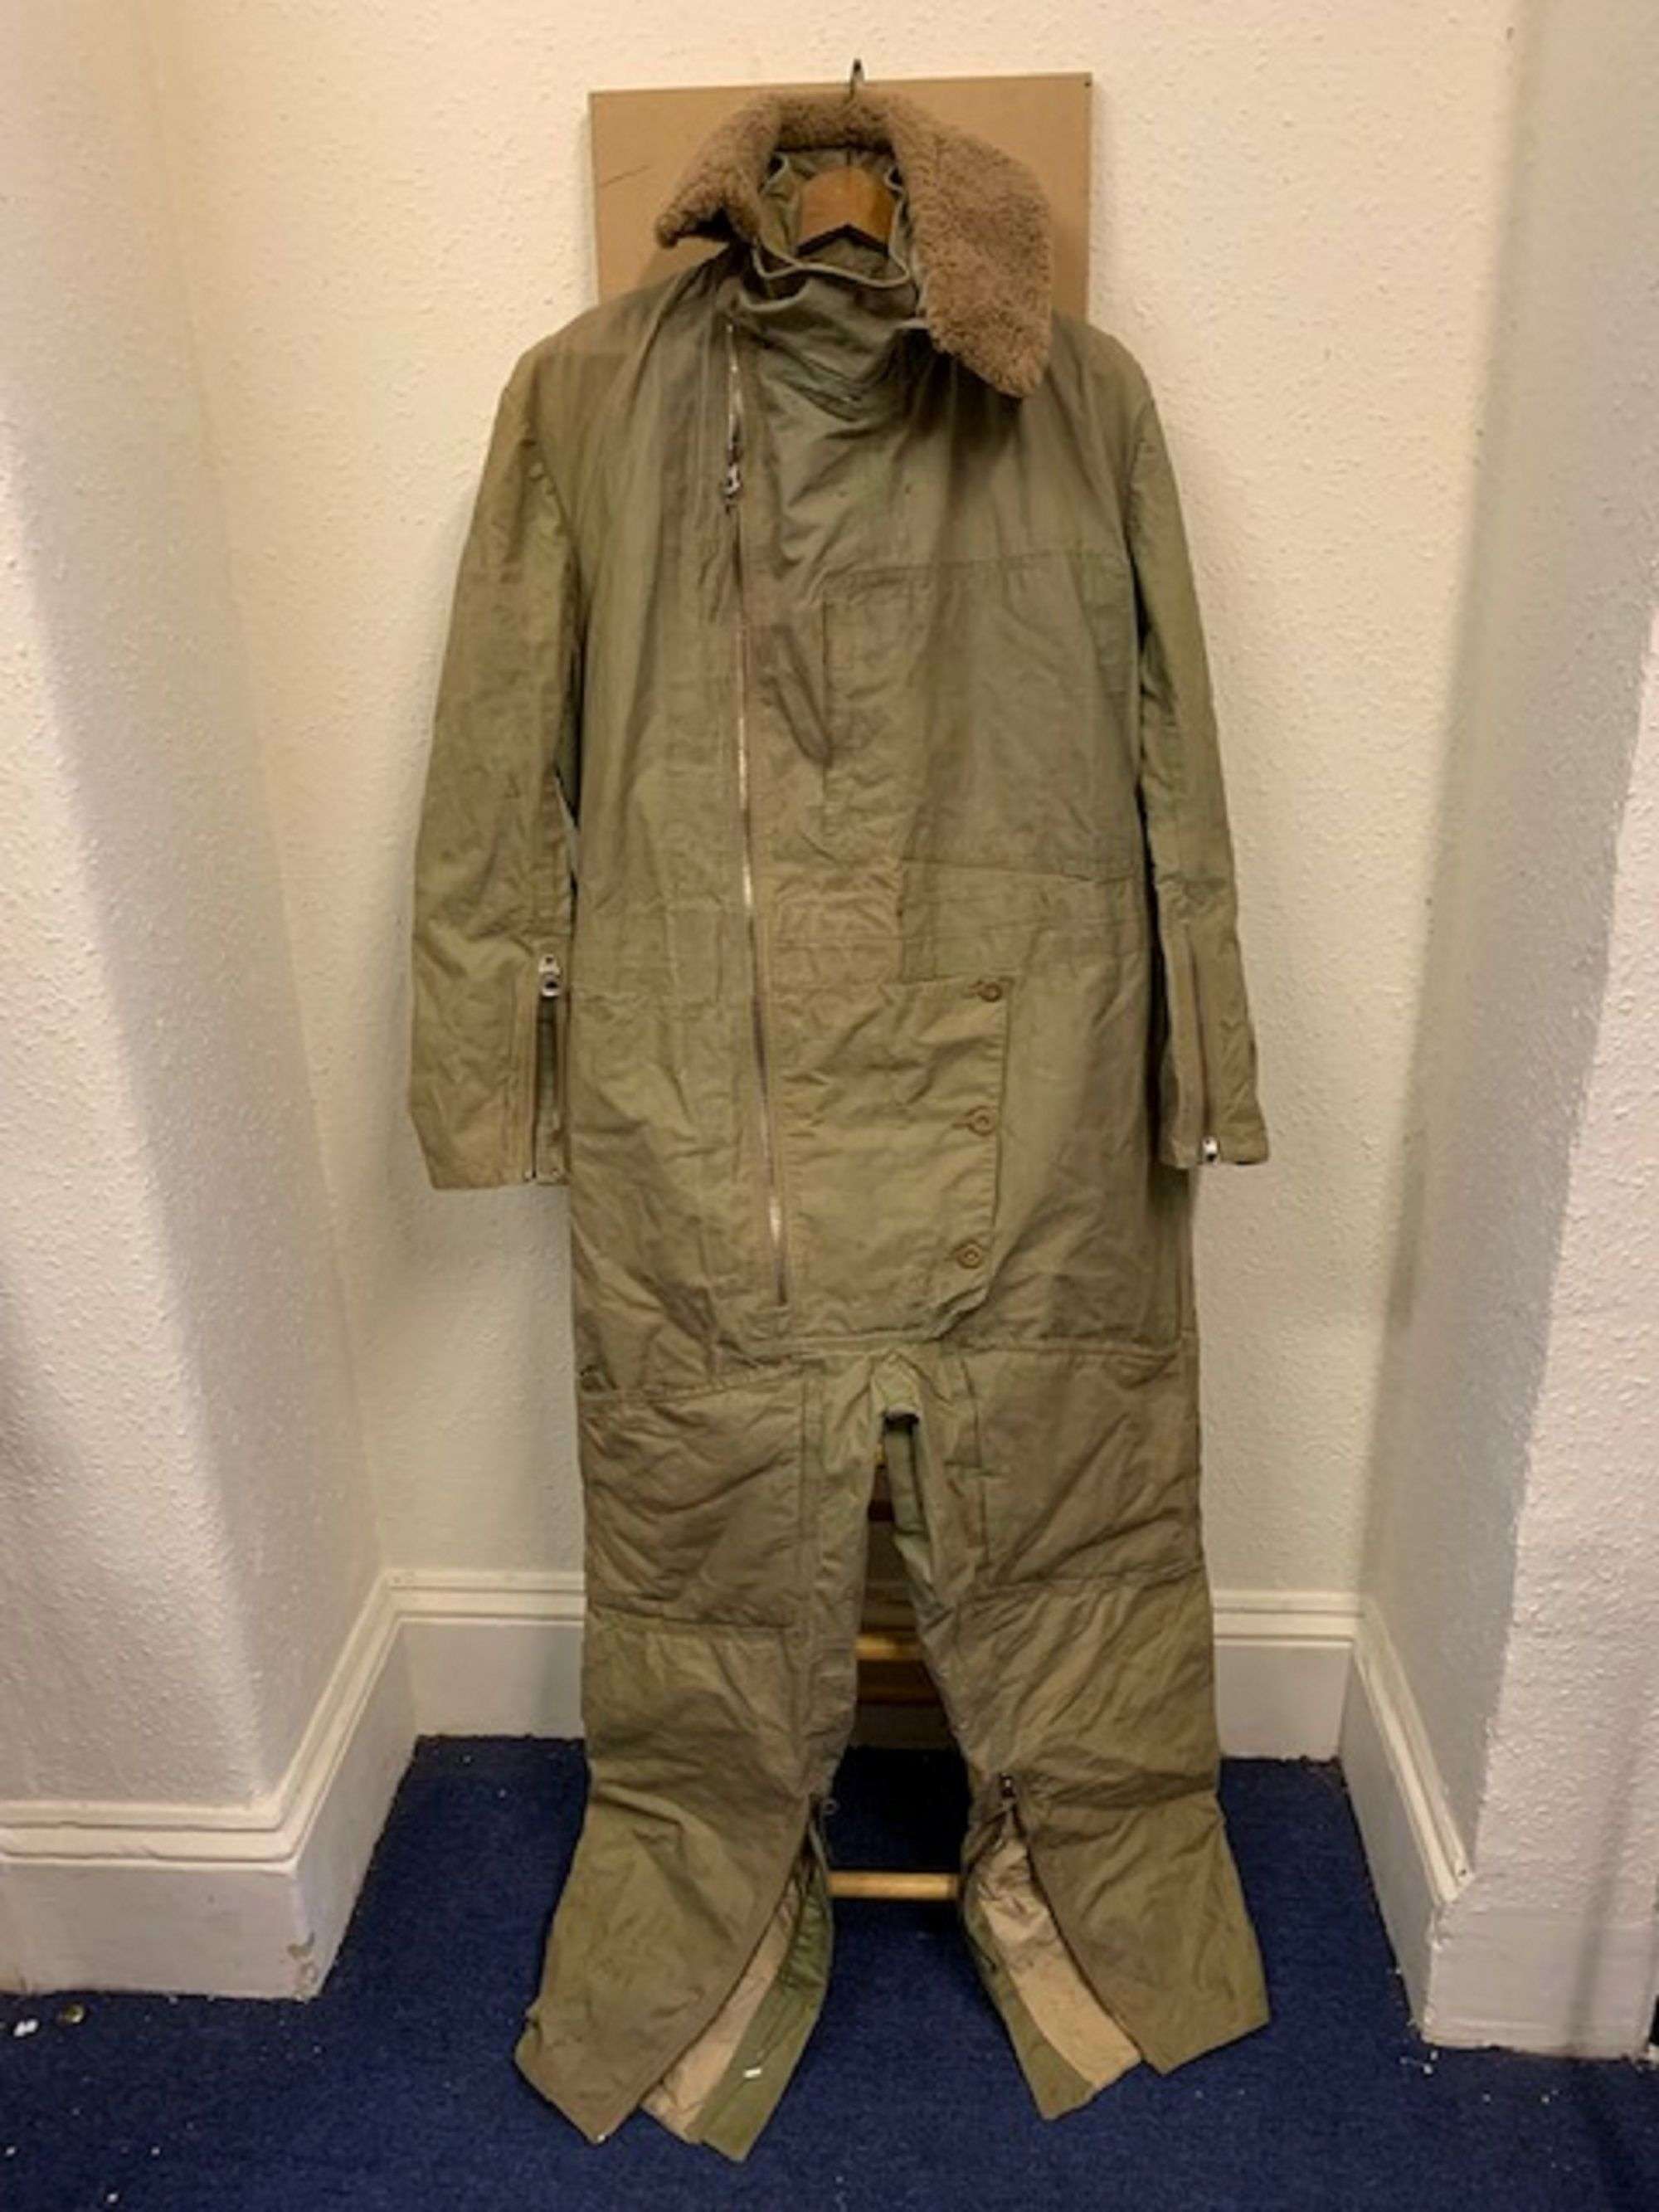 RARE 1930's PATTERN SIDCOT FLYING SUIT